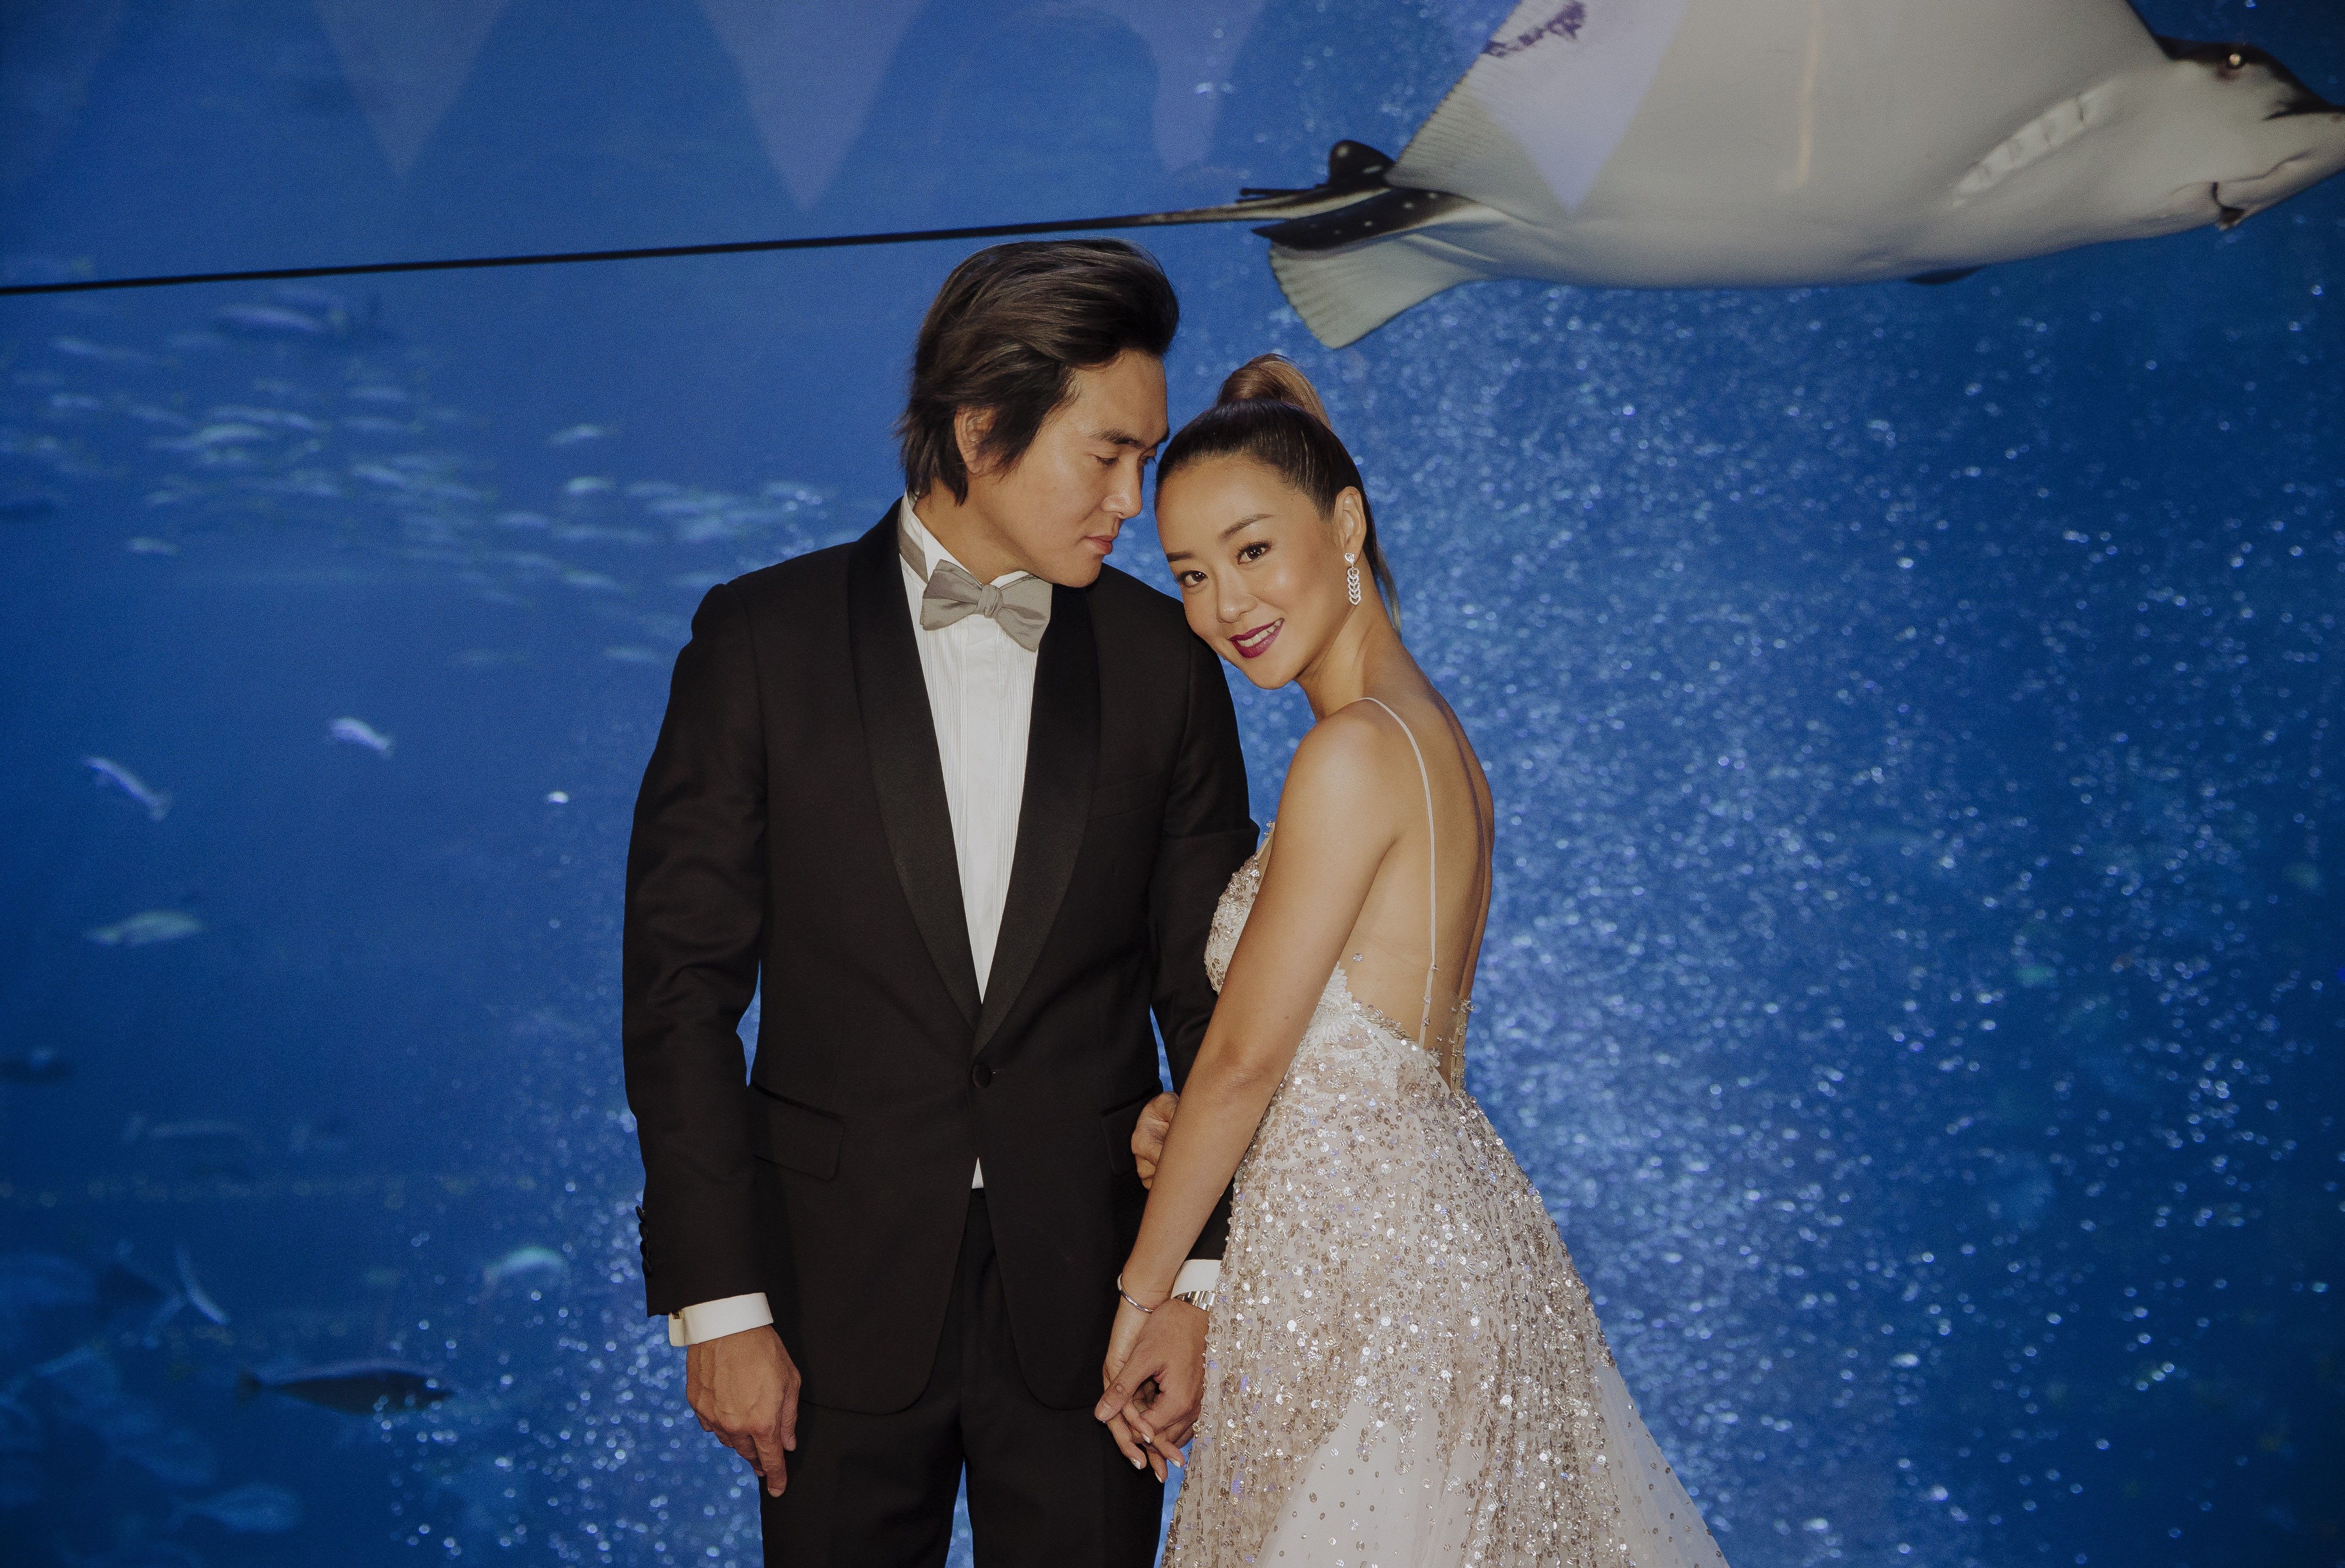 Tanglin Star Roz Pho Got Married To Her Childhood Sweetheart At An Aquarium And We Have The Photos